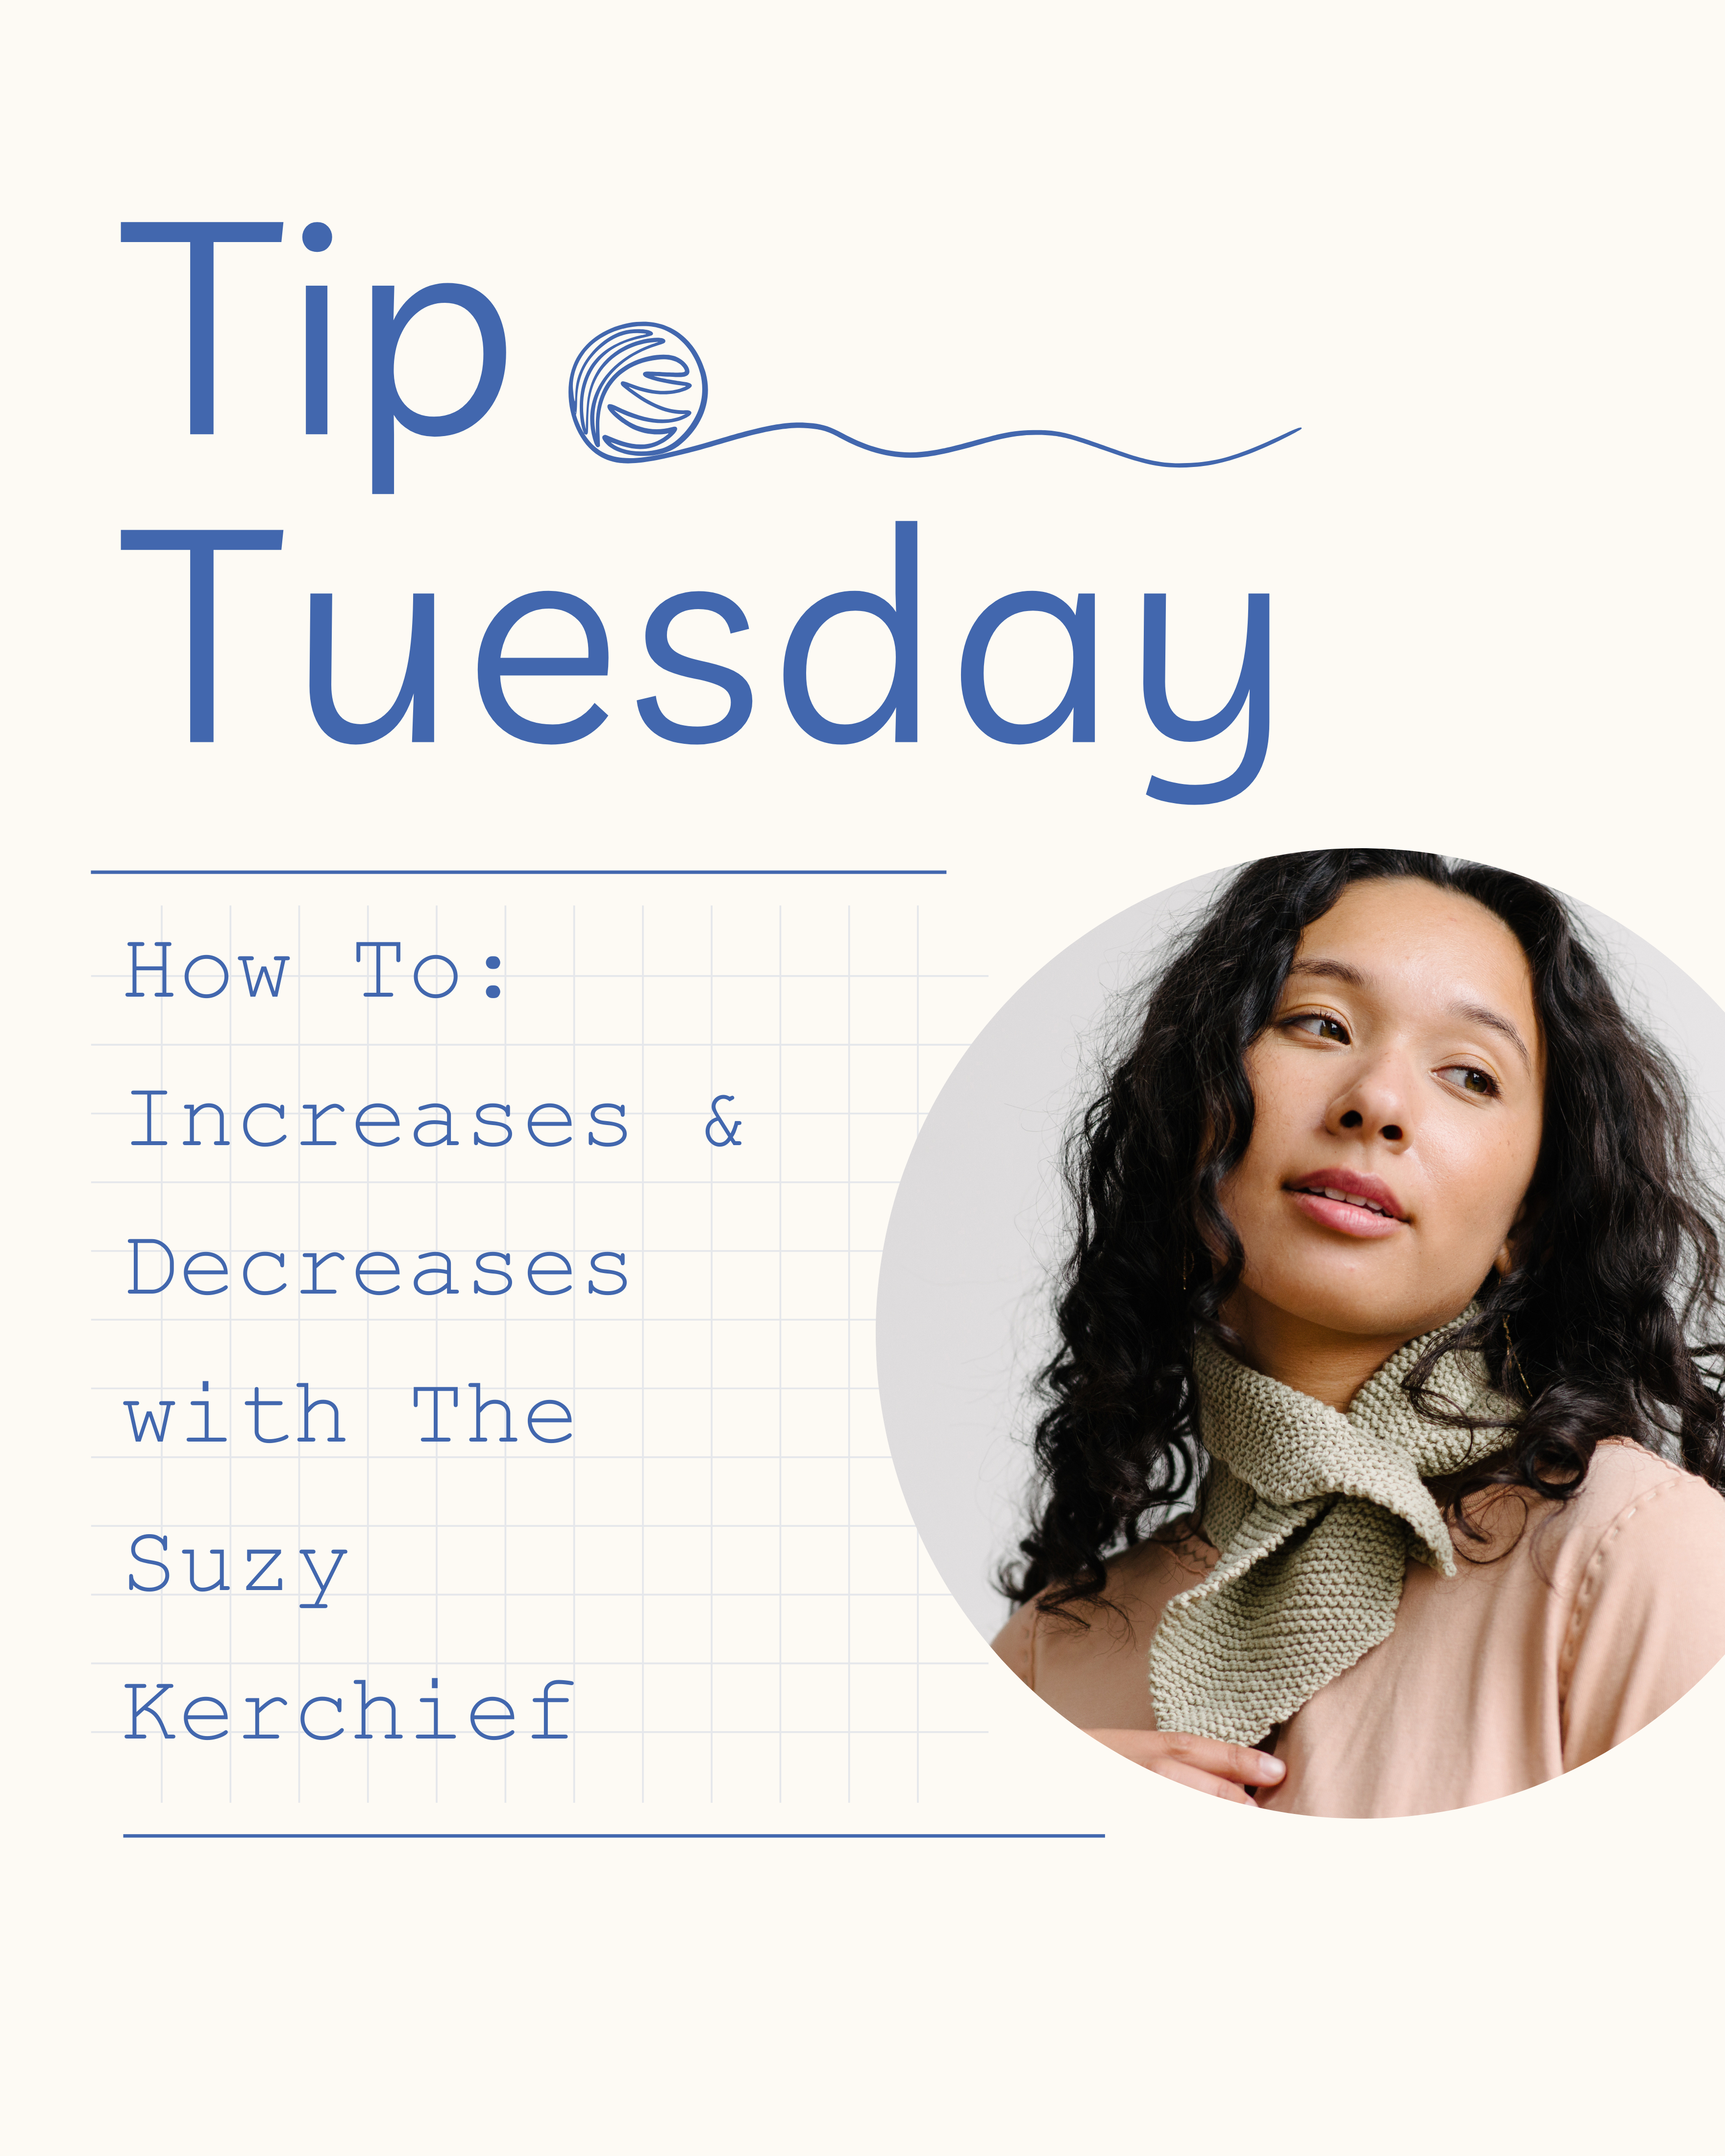 Tip Tuesday: Increases & Decreases with The Suzy Kerchief